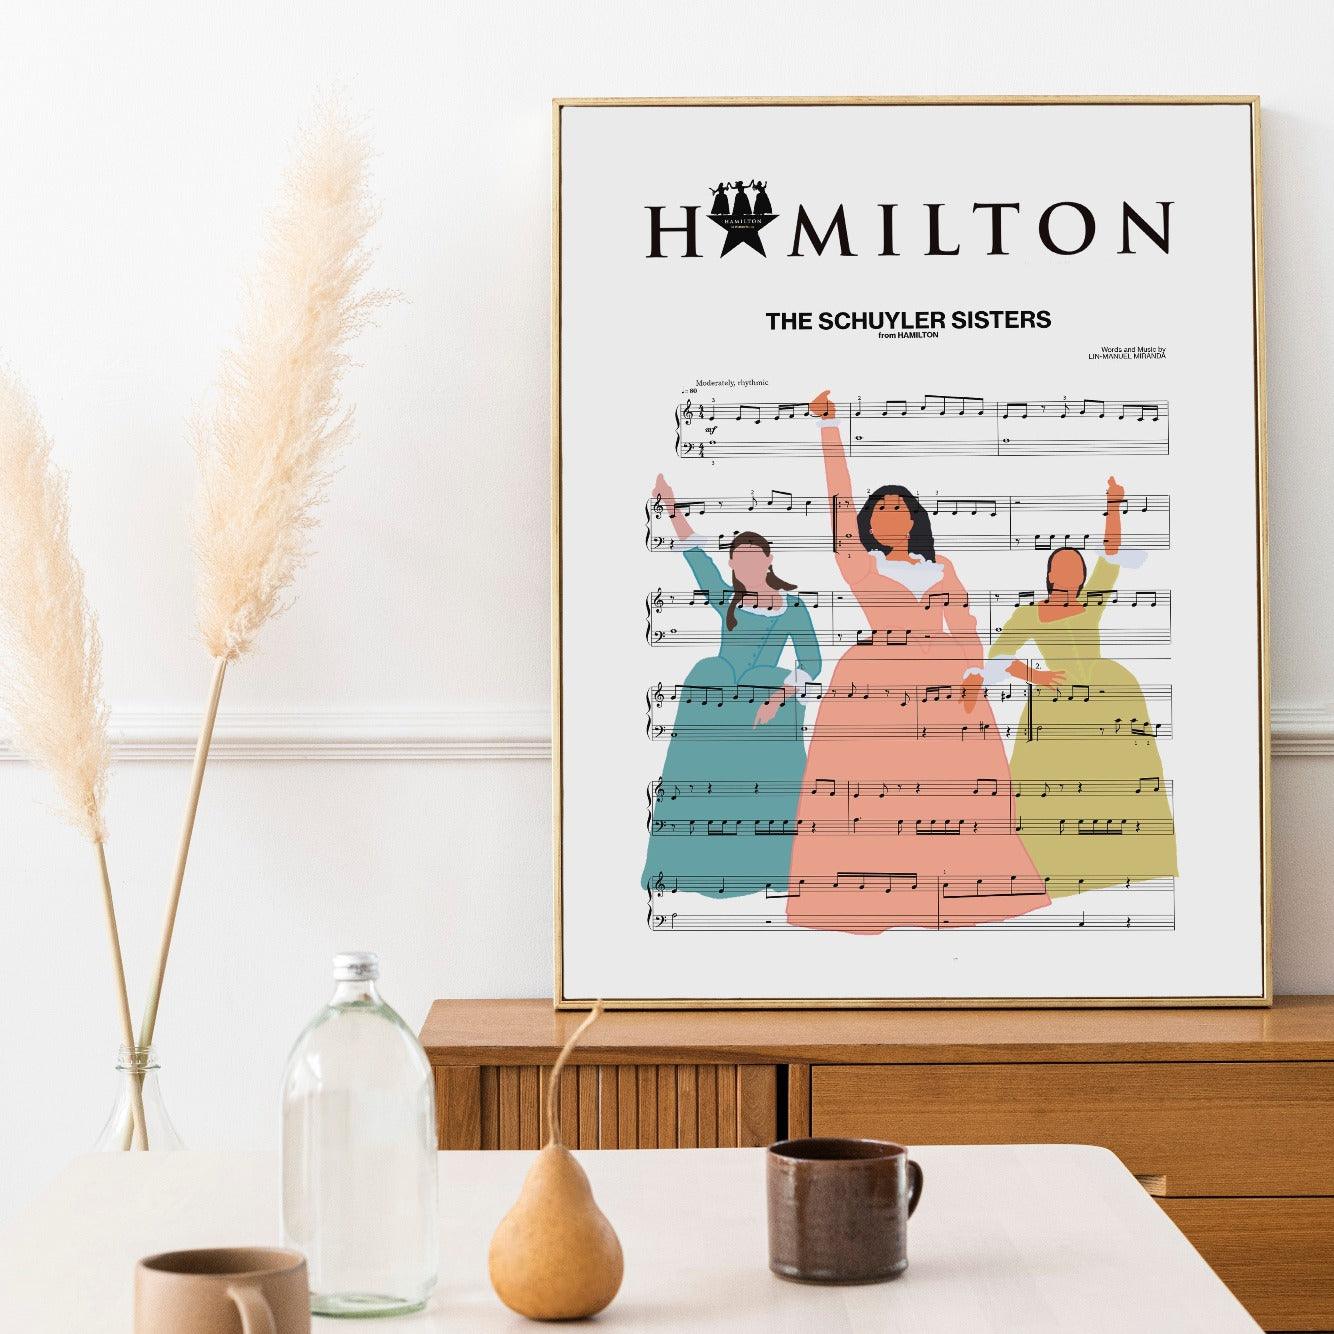 Bring some extra sass to your decor with this Hamilton - The Schuyler Sisters Poster. Featuring the stars of the history-making musical, this posters brings some extra sass to your decor. With a variety of prints to choose from, you can find the perfect one to match your decor.